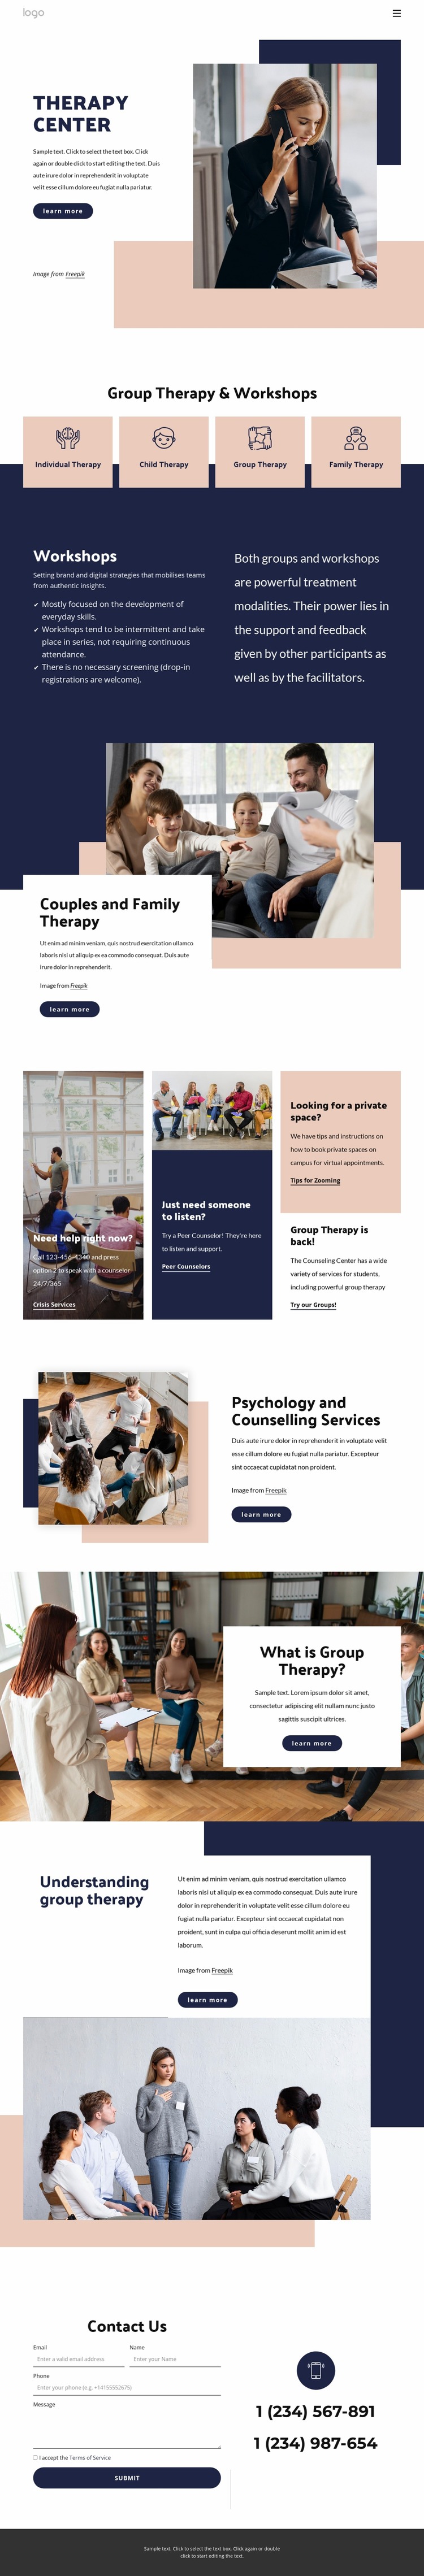 Therapy center Html Website Builder